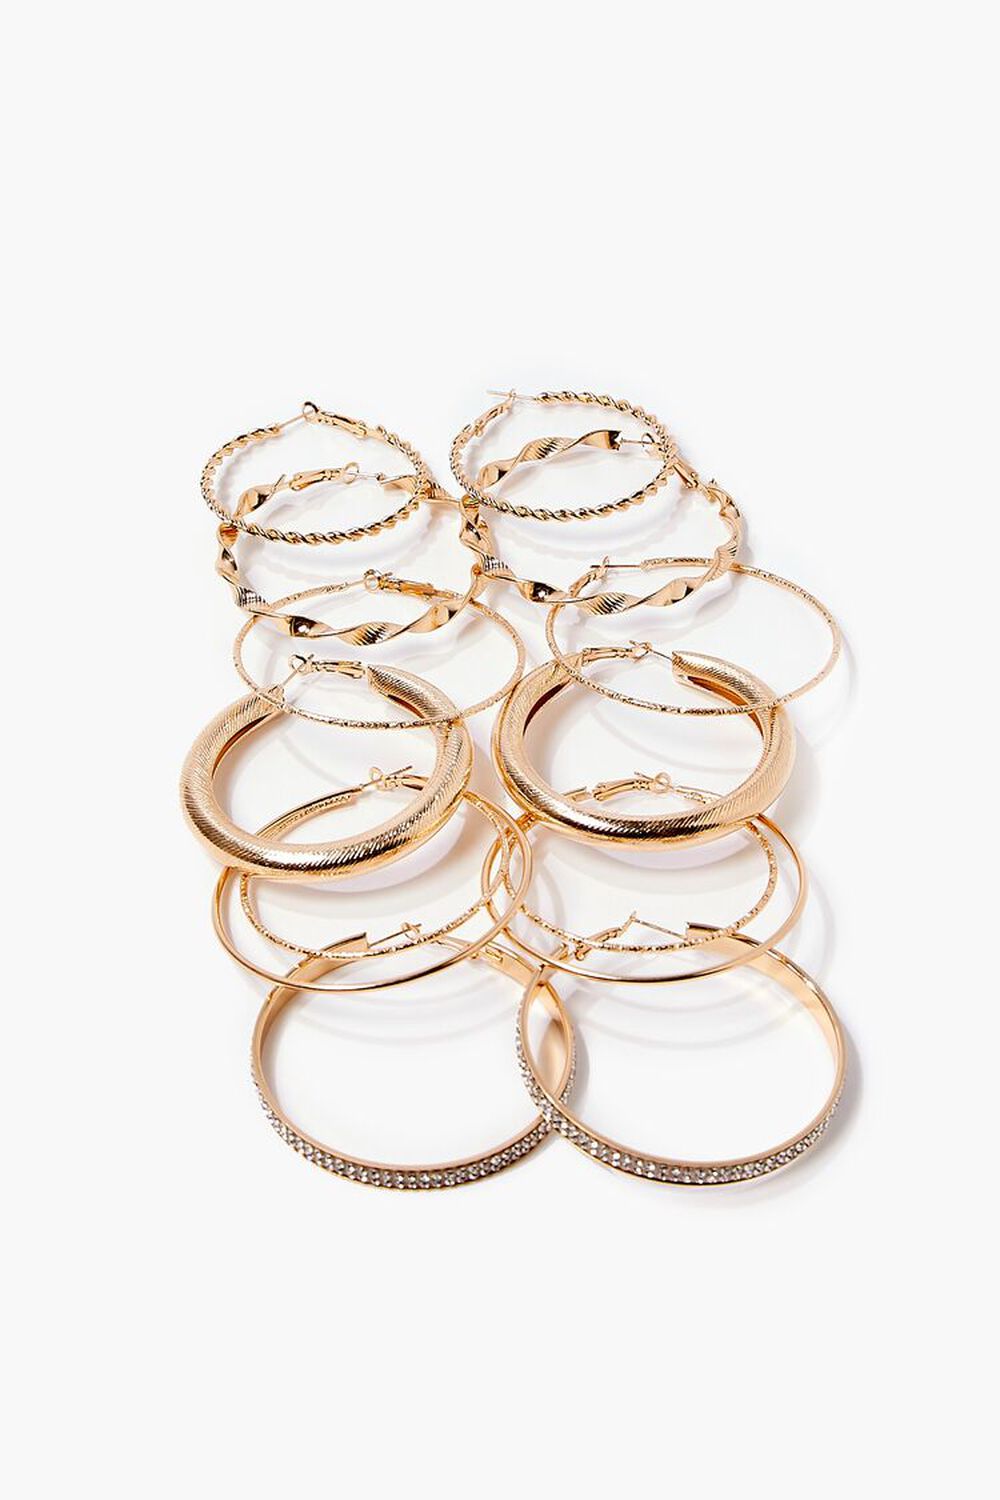 GOLD/CLEAR Twisted Hoop Earring Set, image 1